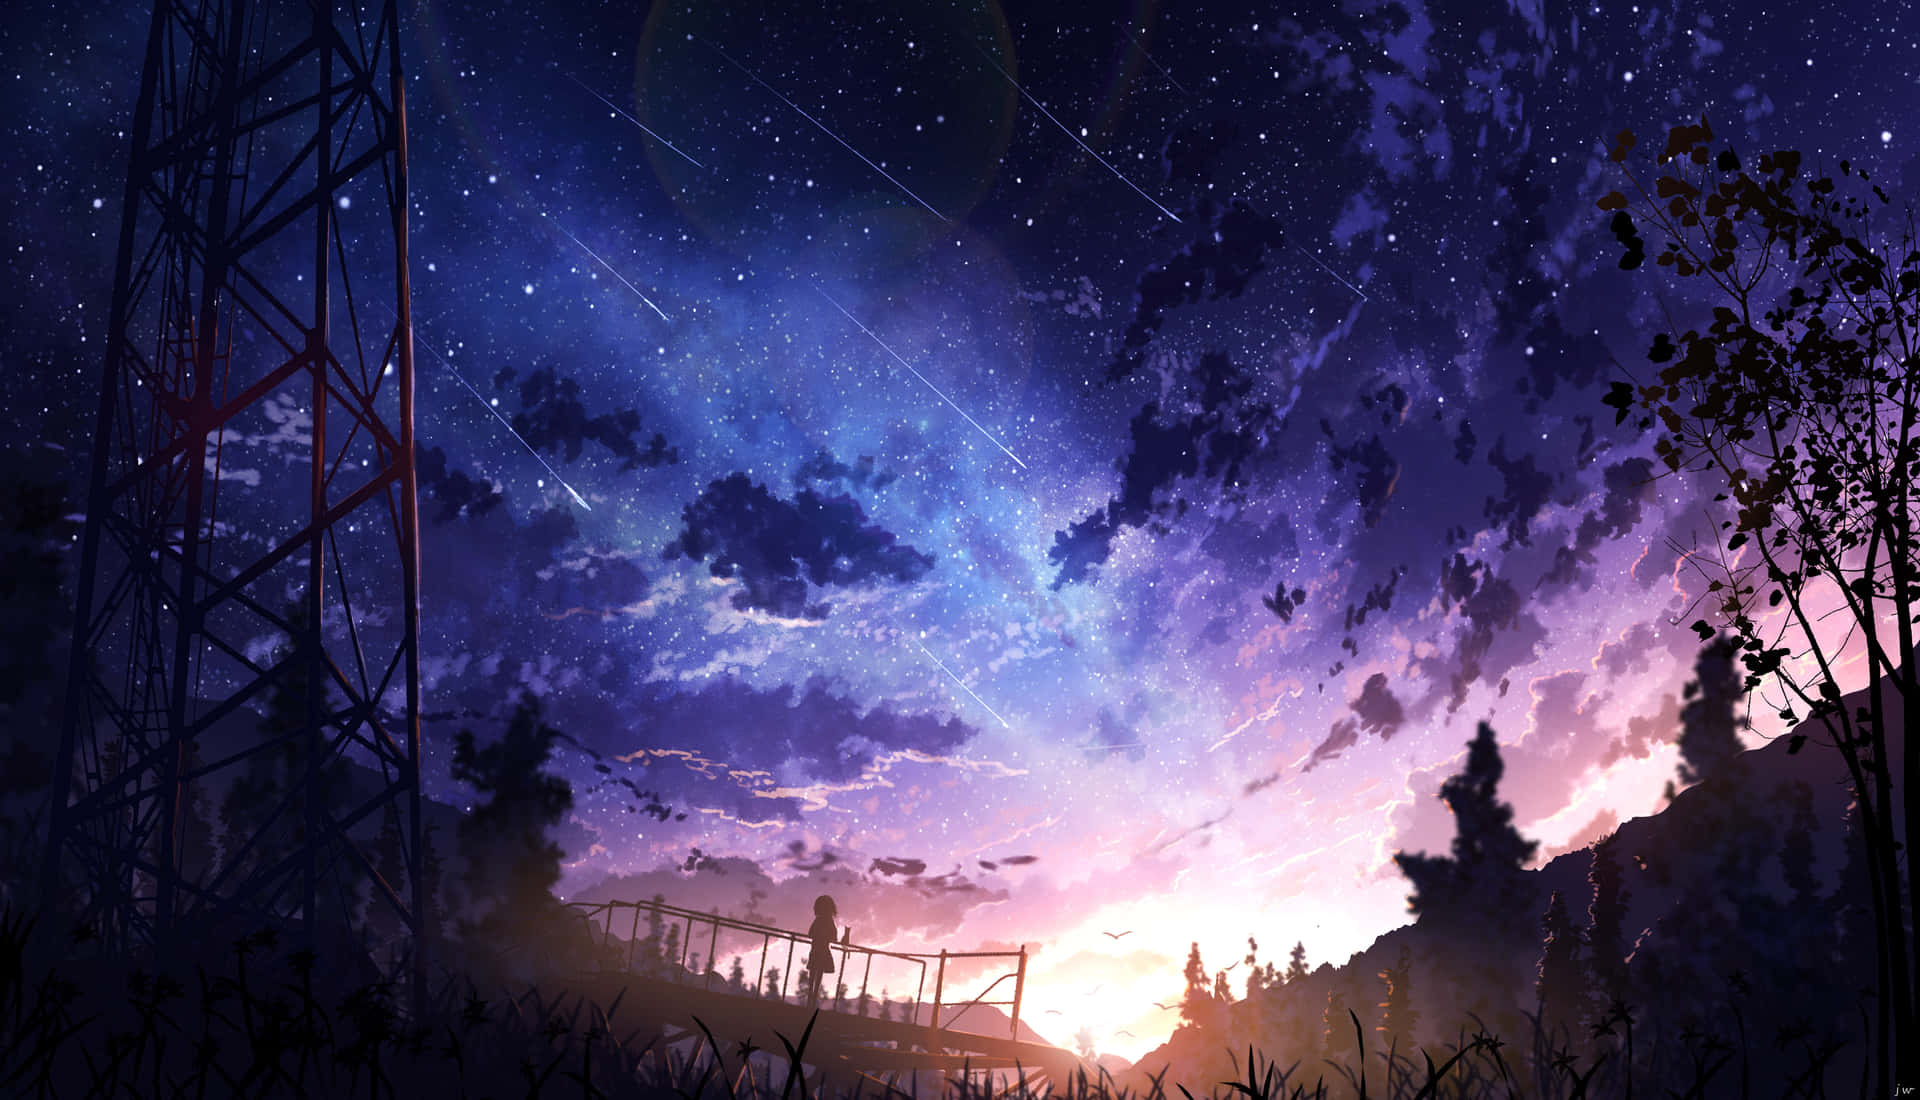 A stunning Anime sunset creating an enchanting atmosphere against a beautiful landscape backdrop.